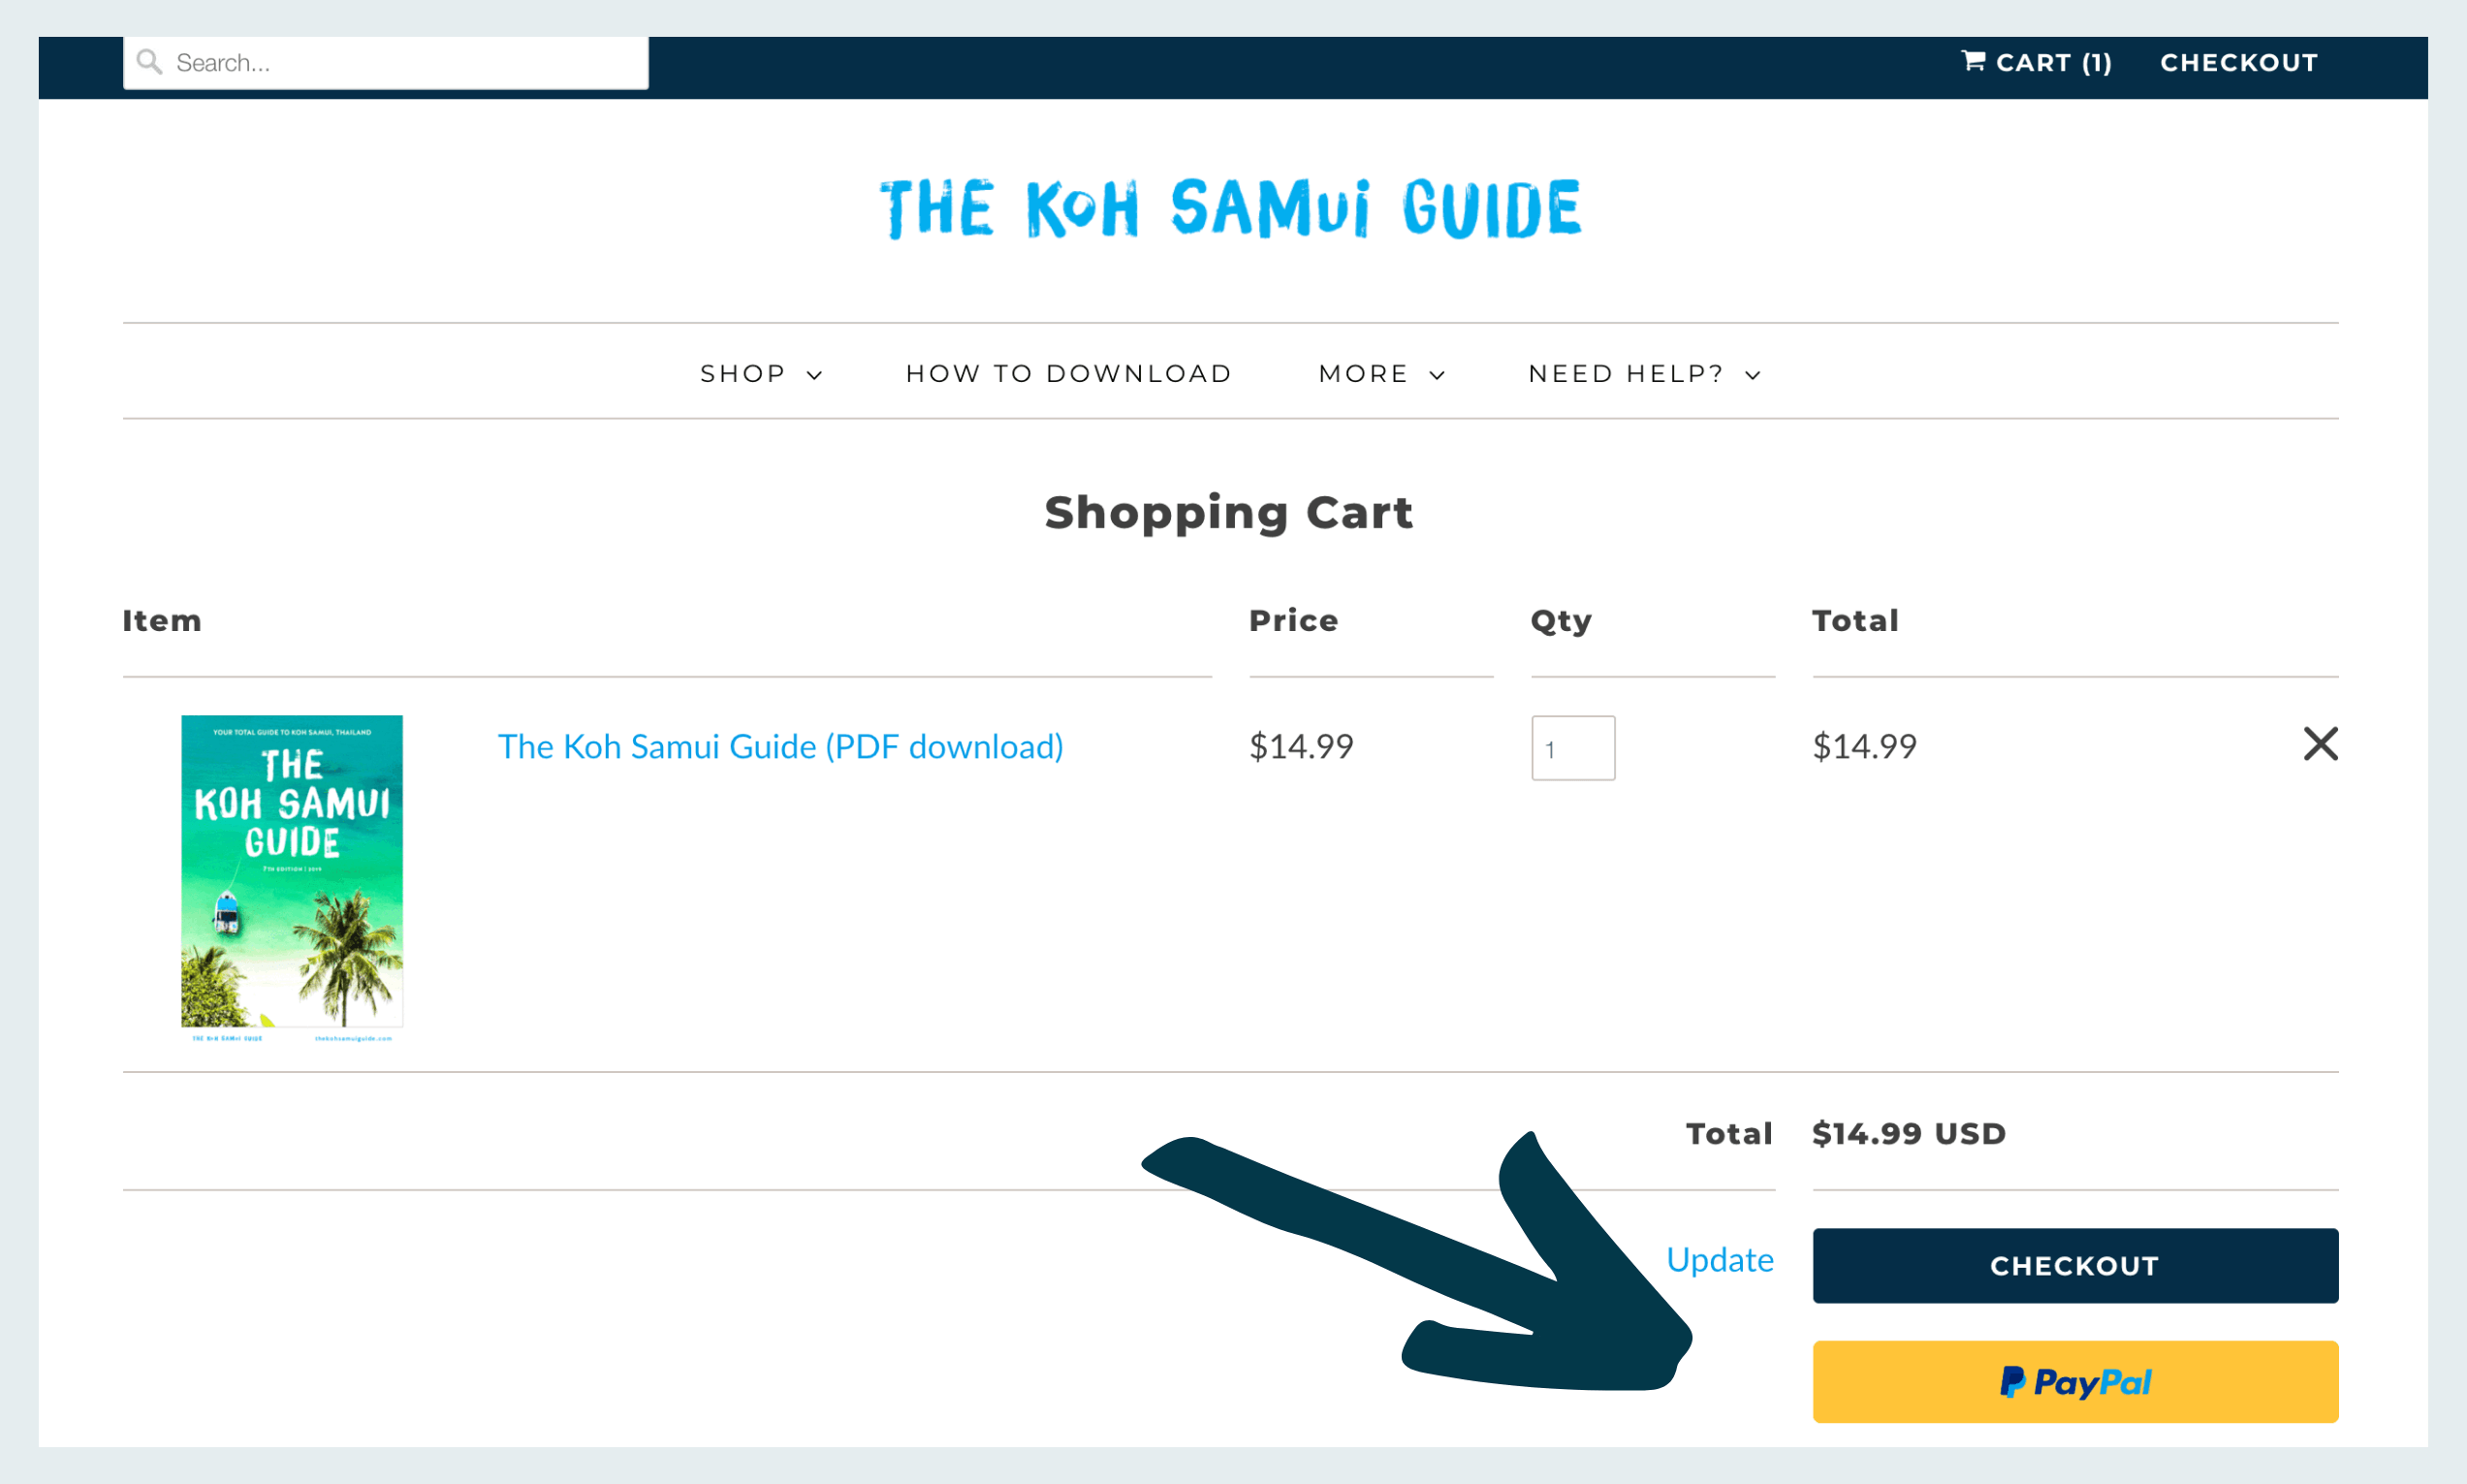 Step-by-step instructions for how to purchase The Koh Samui Guide with PayPal: How to edit your shopping cart